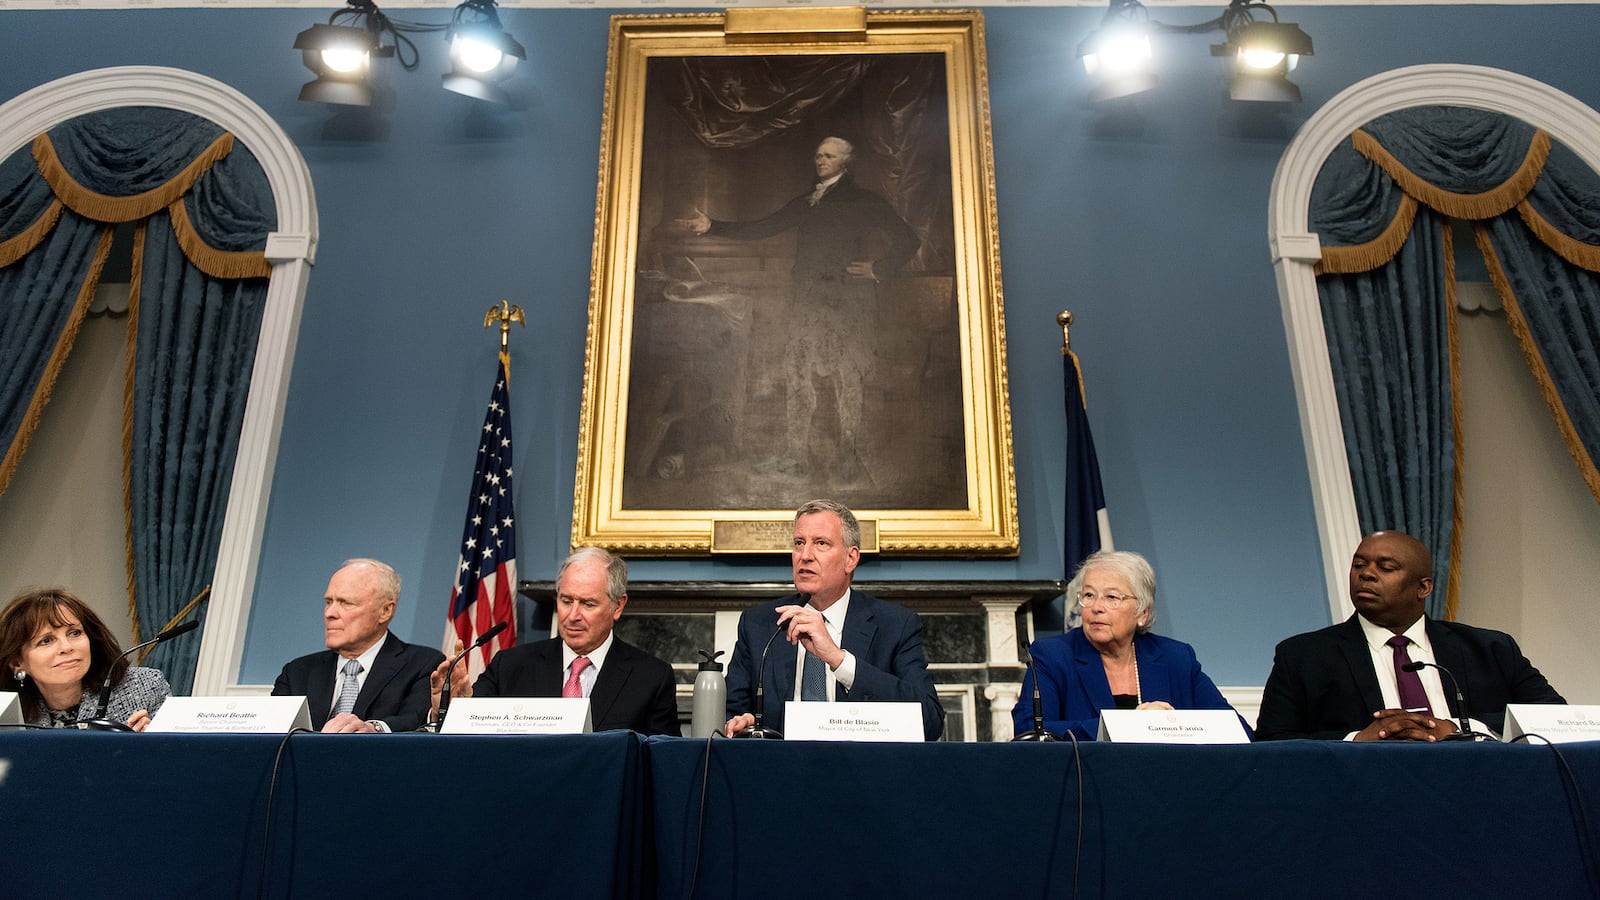 New York City Mayor Bill de Blasio held a press conference to demonstrate business leaders' support for mayoral control in May 2016.